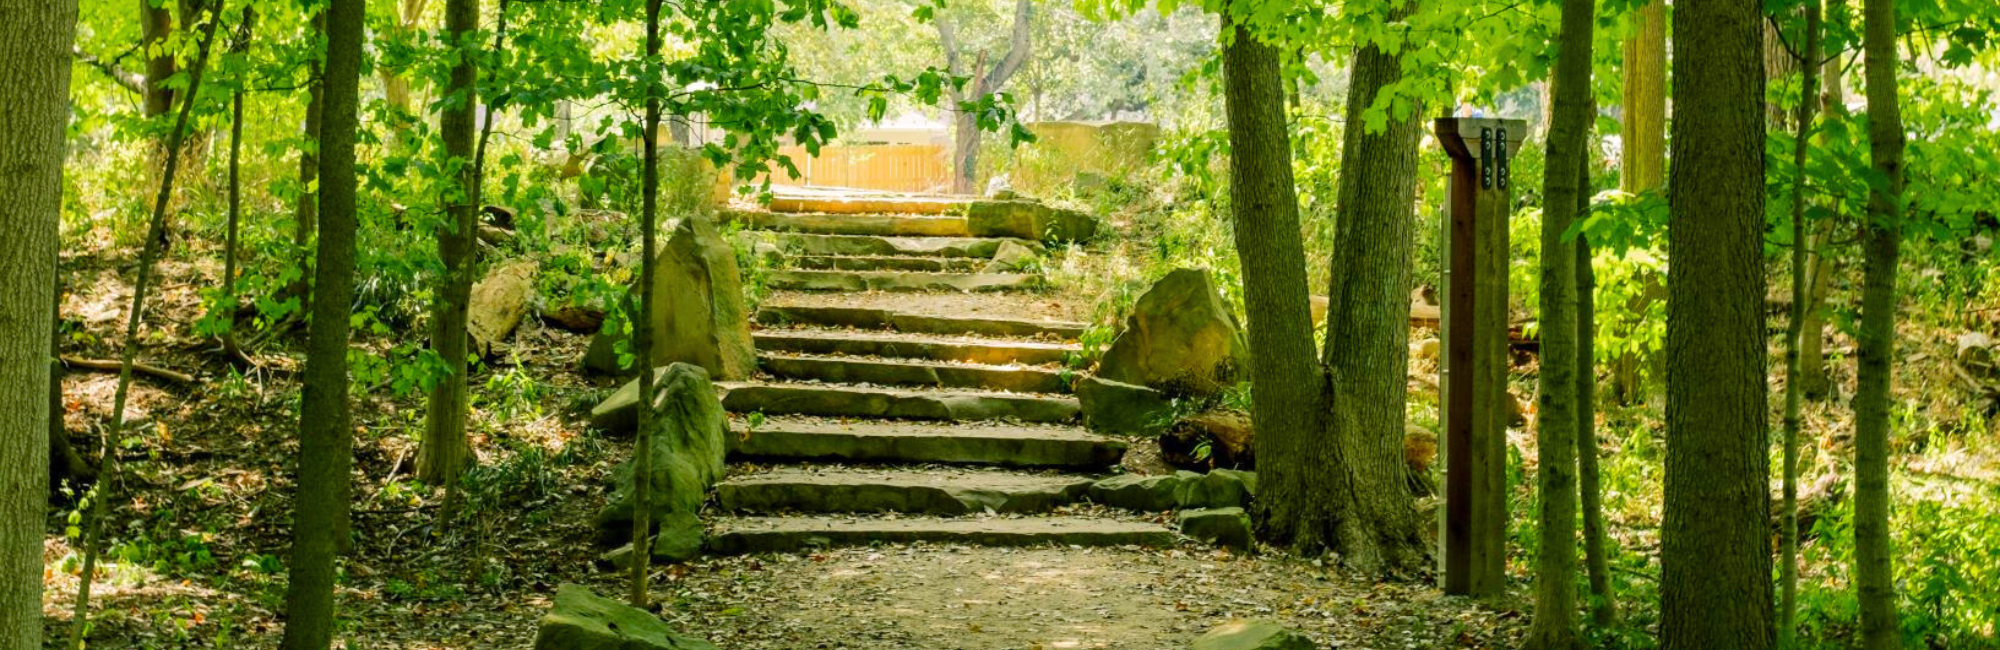 Park woods with rock steps up a small hill